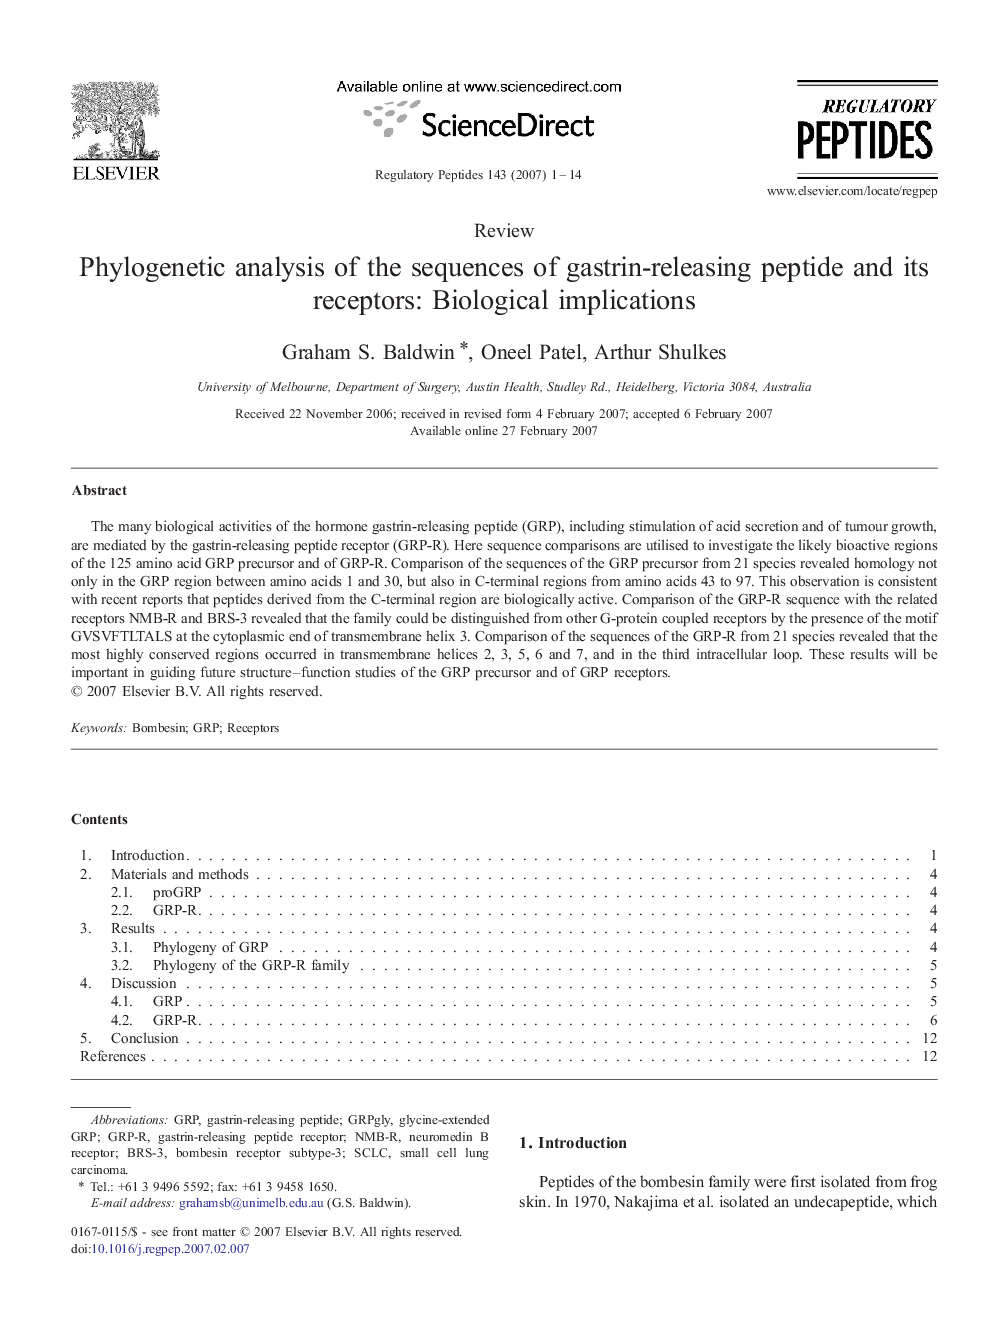 Phylogenetic analysis of the sequences of gastrin-releasing peptide and its receptors: Biological implications